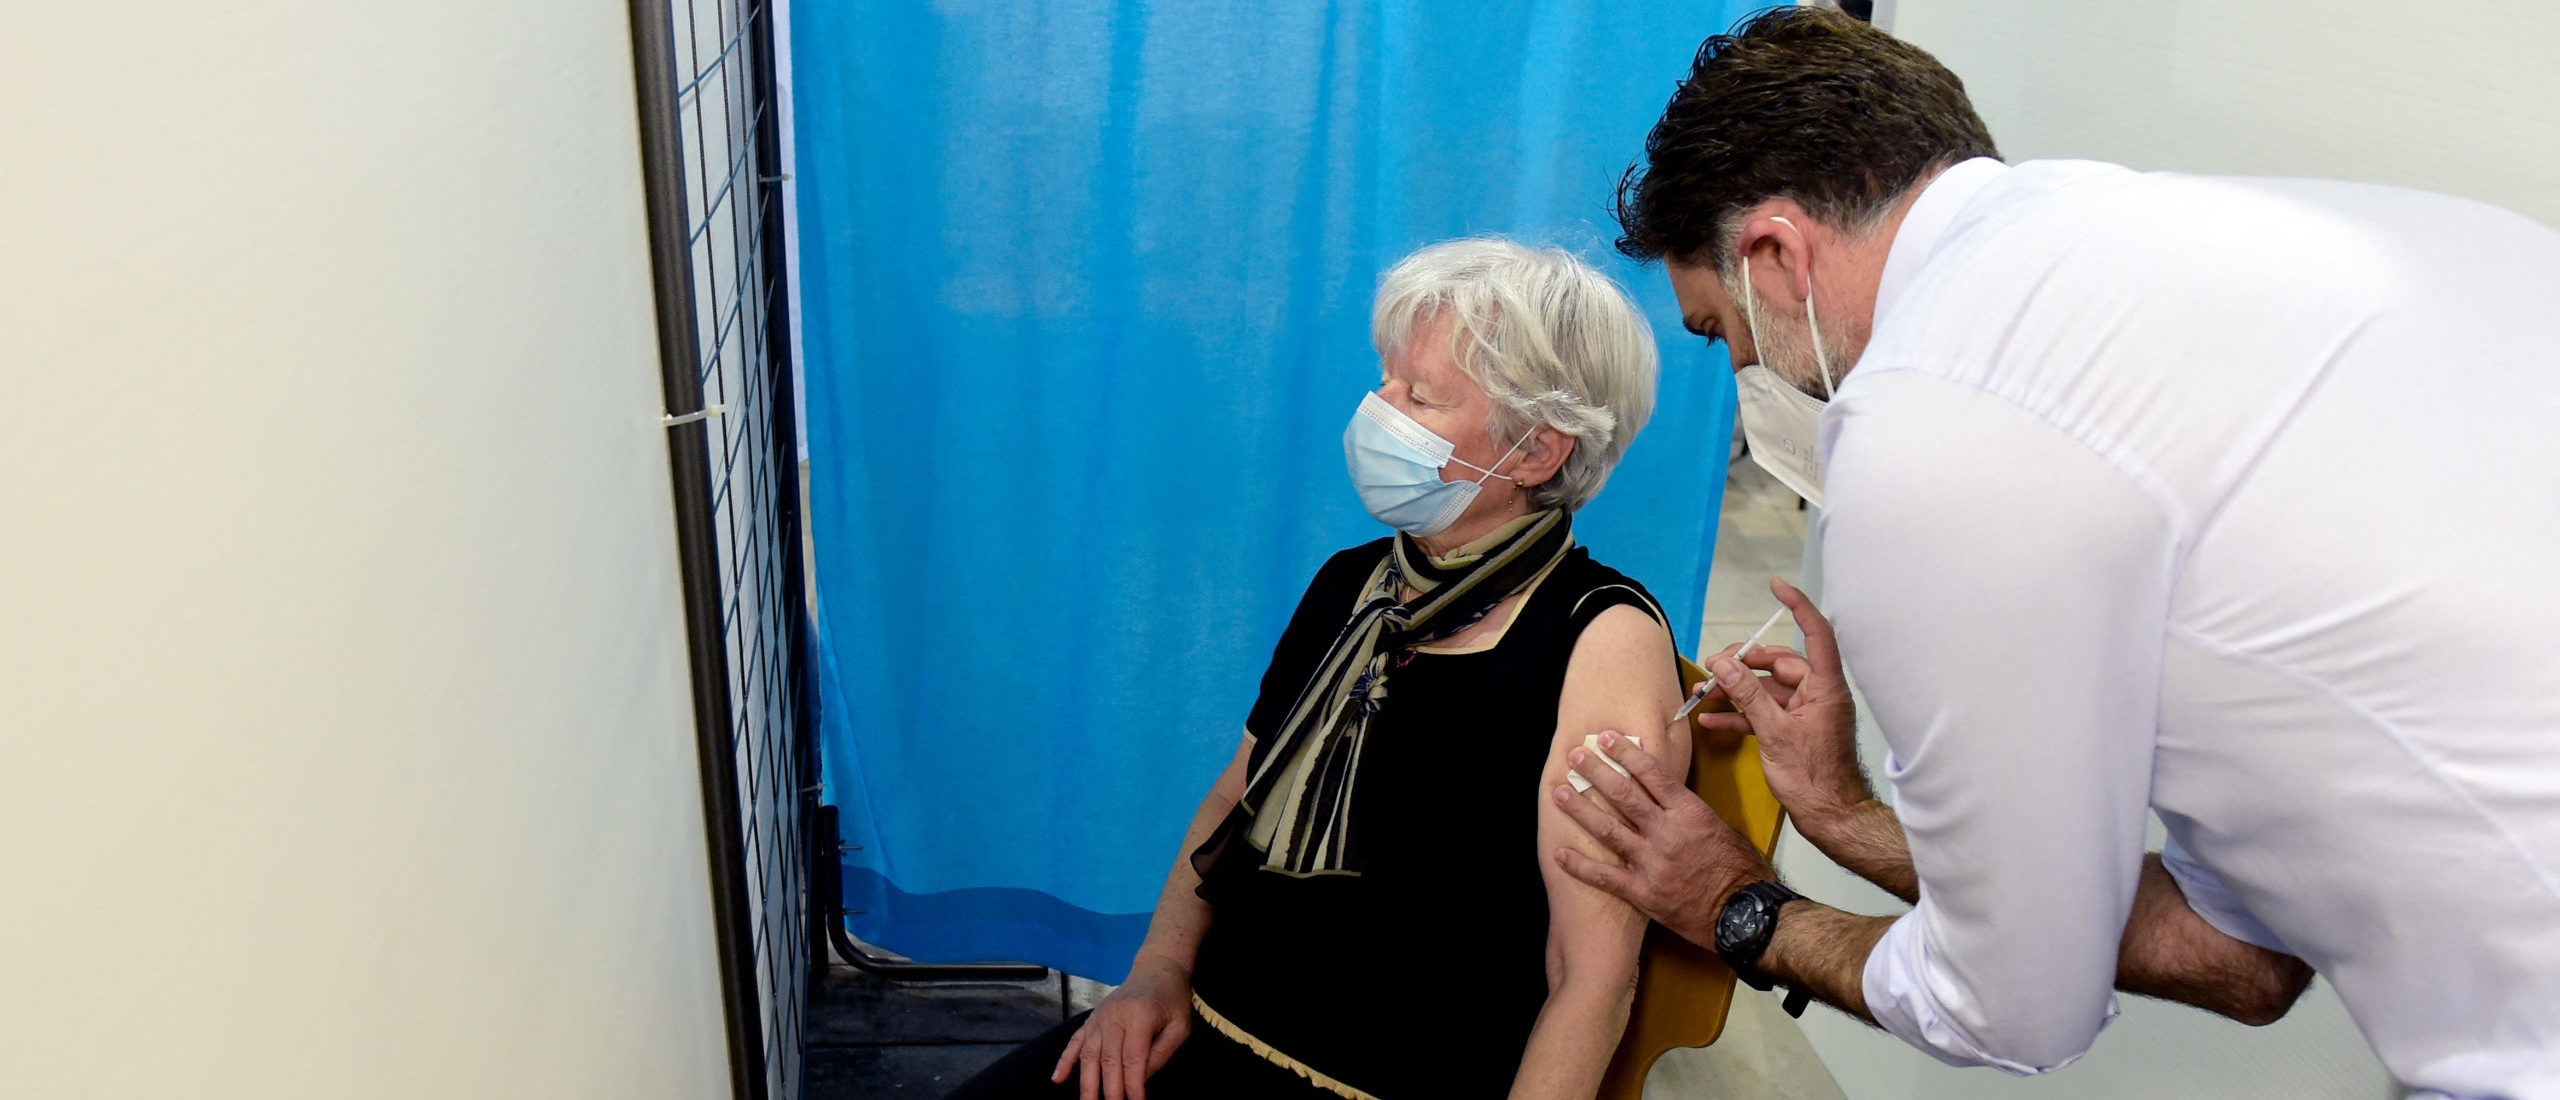 A nurse administers a dose of the Pfizer/BioNTech Covid-19 vaccine to a member of the public at a vaccination centre set up in the Parc Chanot exhibition centre in Marseille, southeastern France, on April 19, 2021. (Photo by NICOLAS TUCAT/AFP via Getty Images)